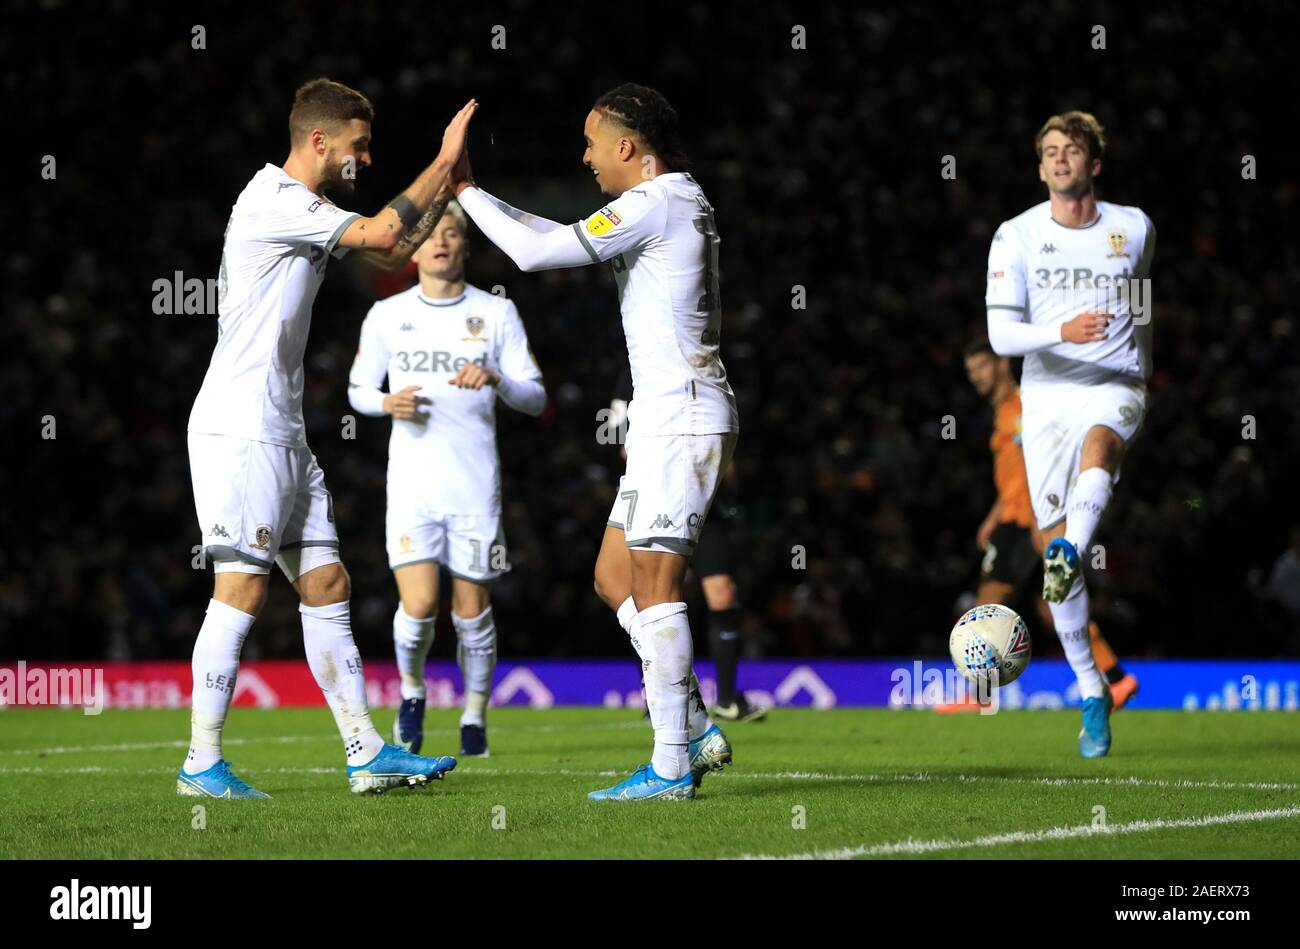 Leeds United player celebrate after Hull City's Jordy de Wijs scores an own goal during the Sky Bet Championship match at Elland Road, Leeds. Stock Photo